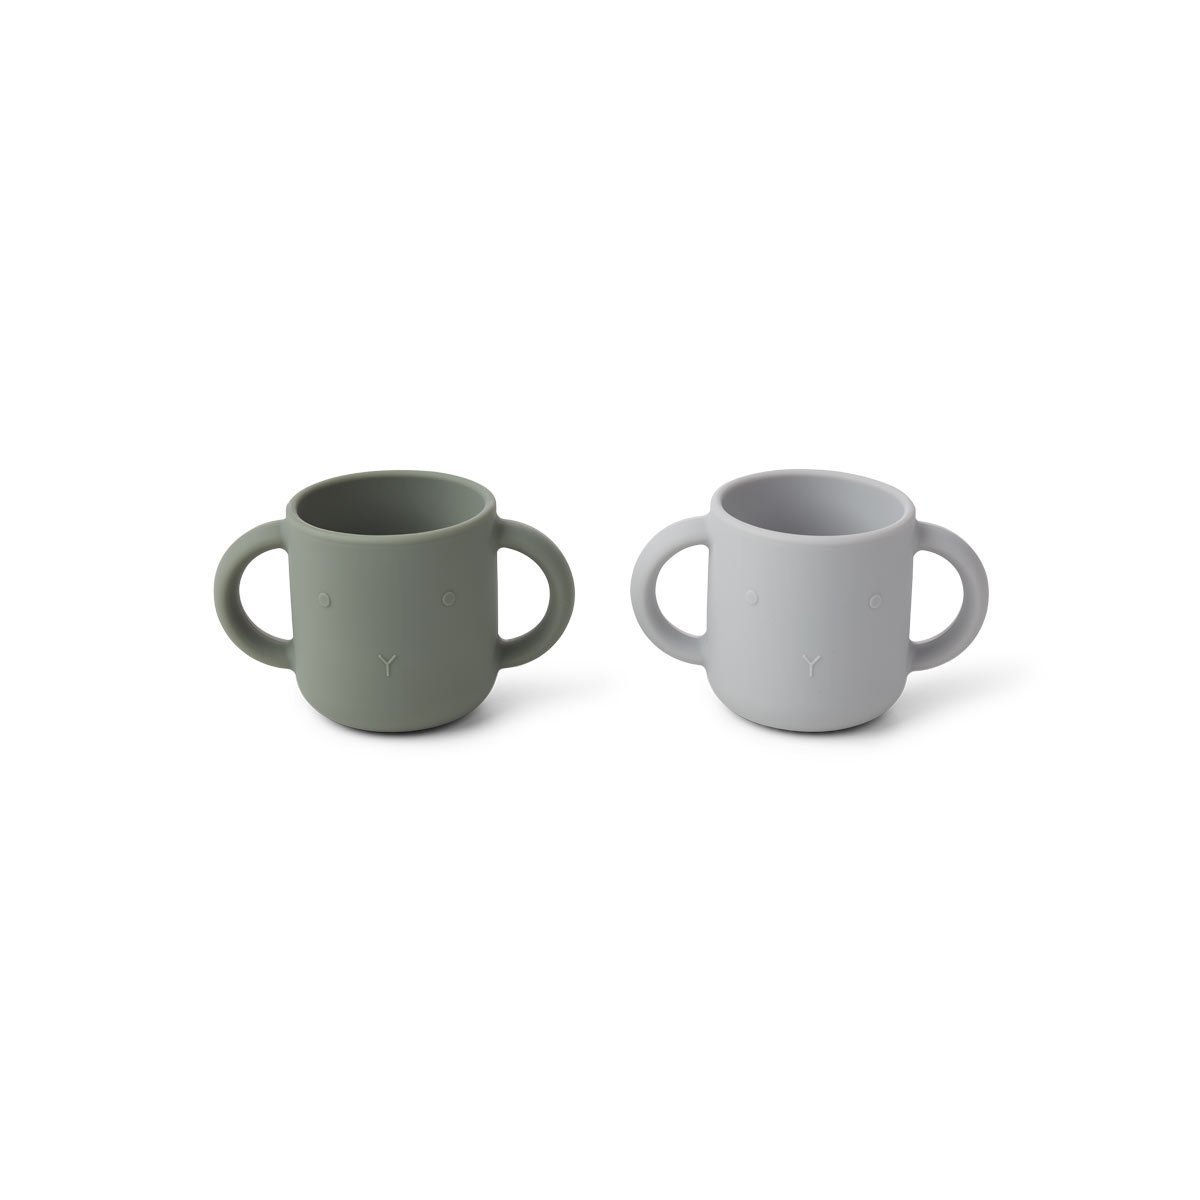 Liewood Gene Silicon cup (2 Pack) - Rabbit Green Faune - Scandibørn